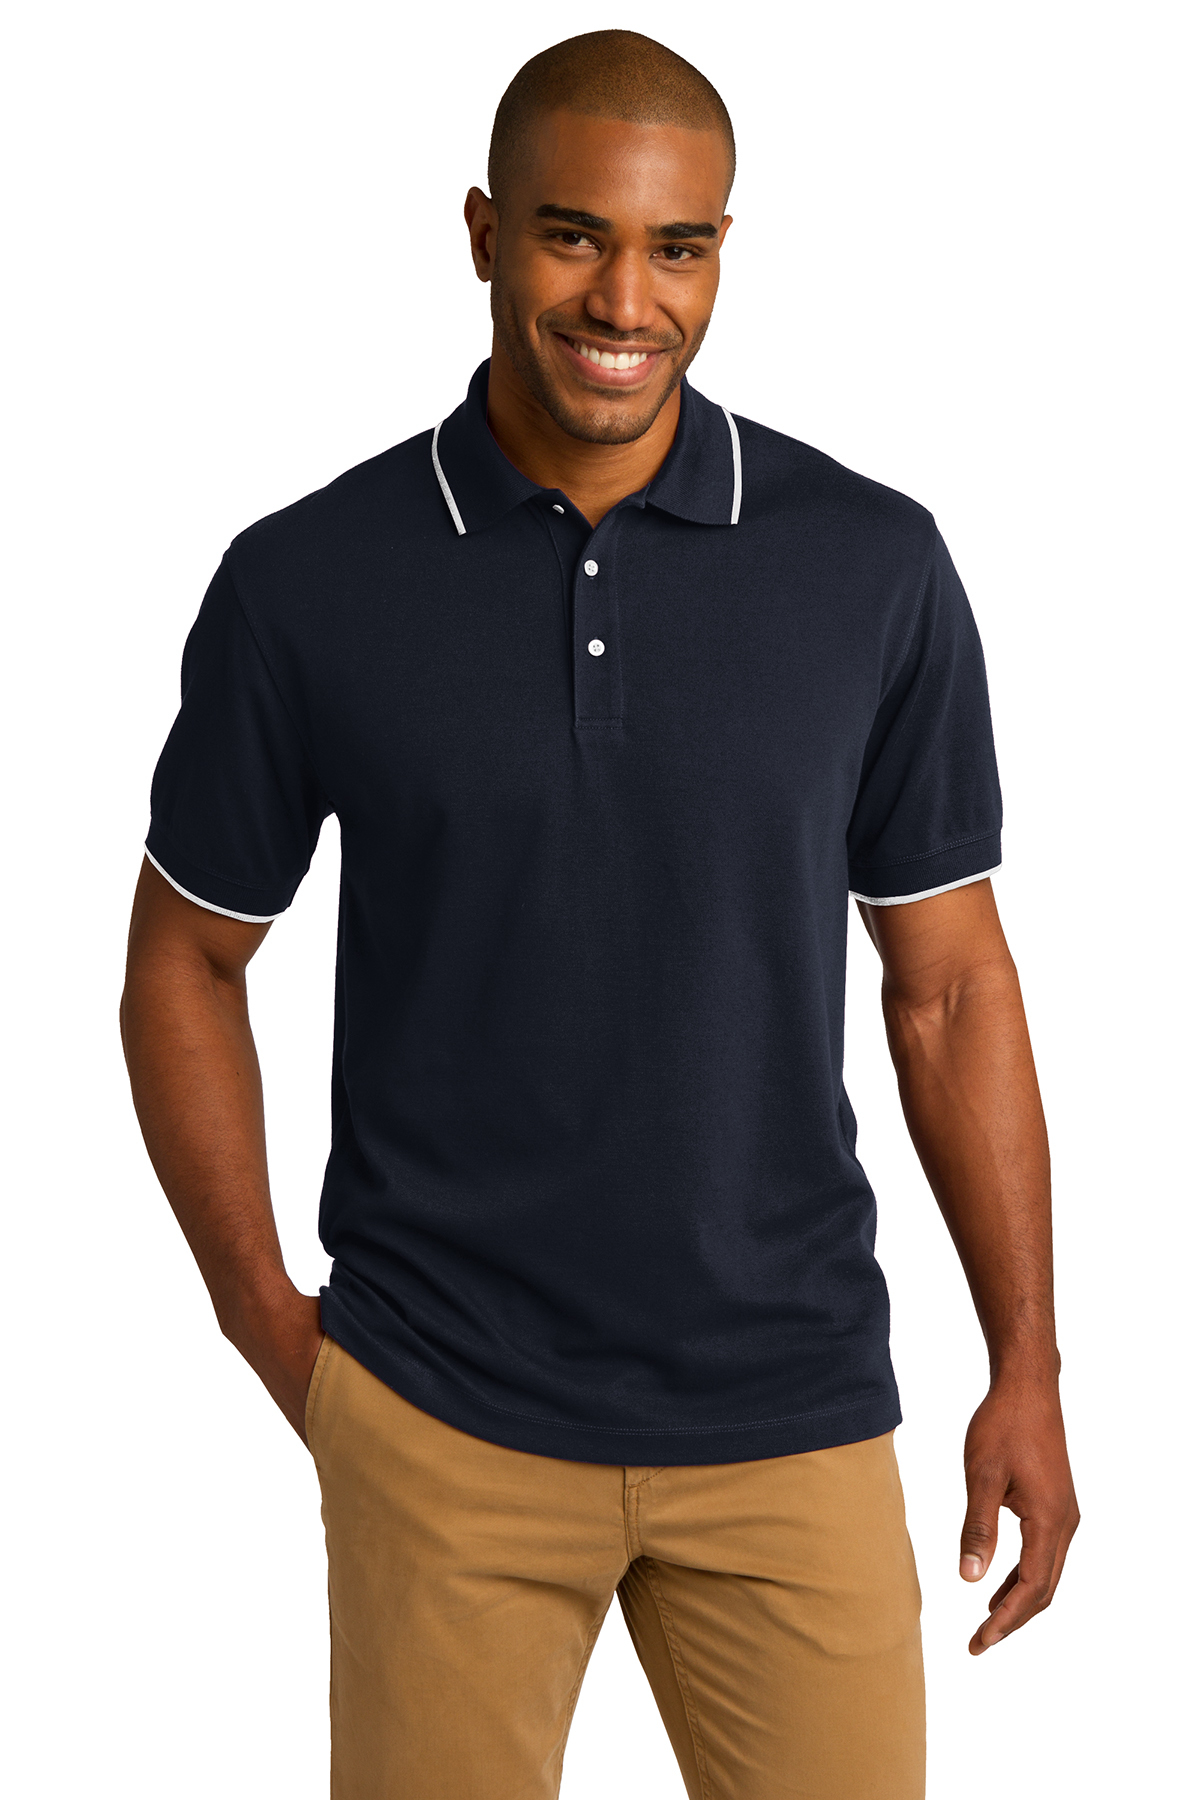 click to view Classic Navy/White